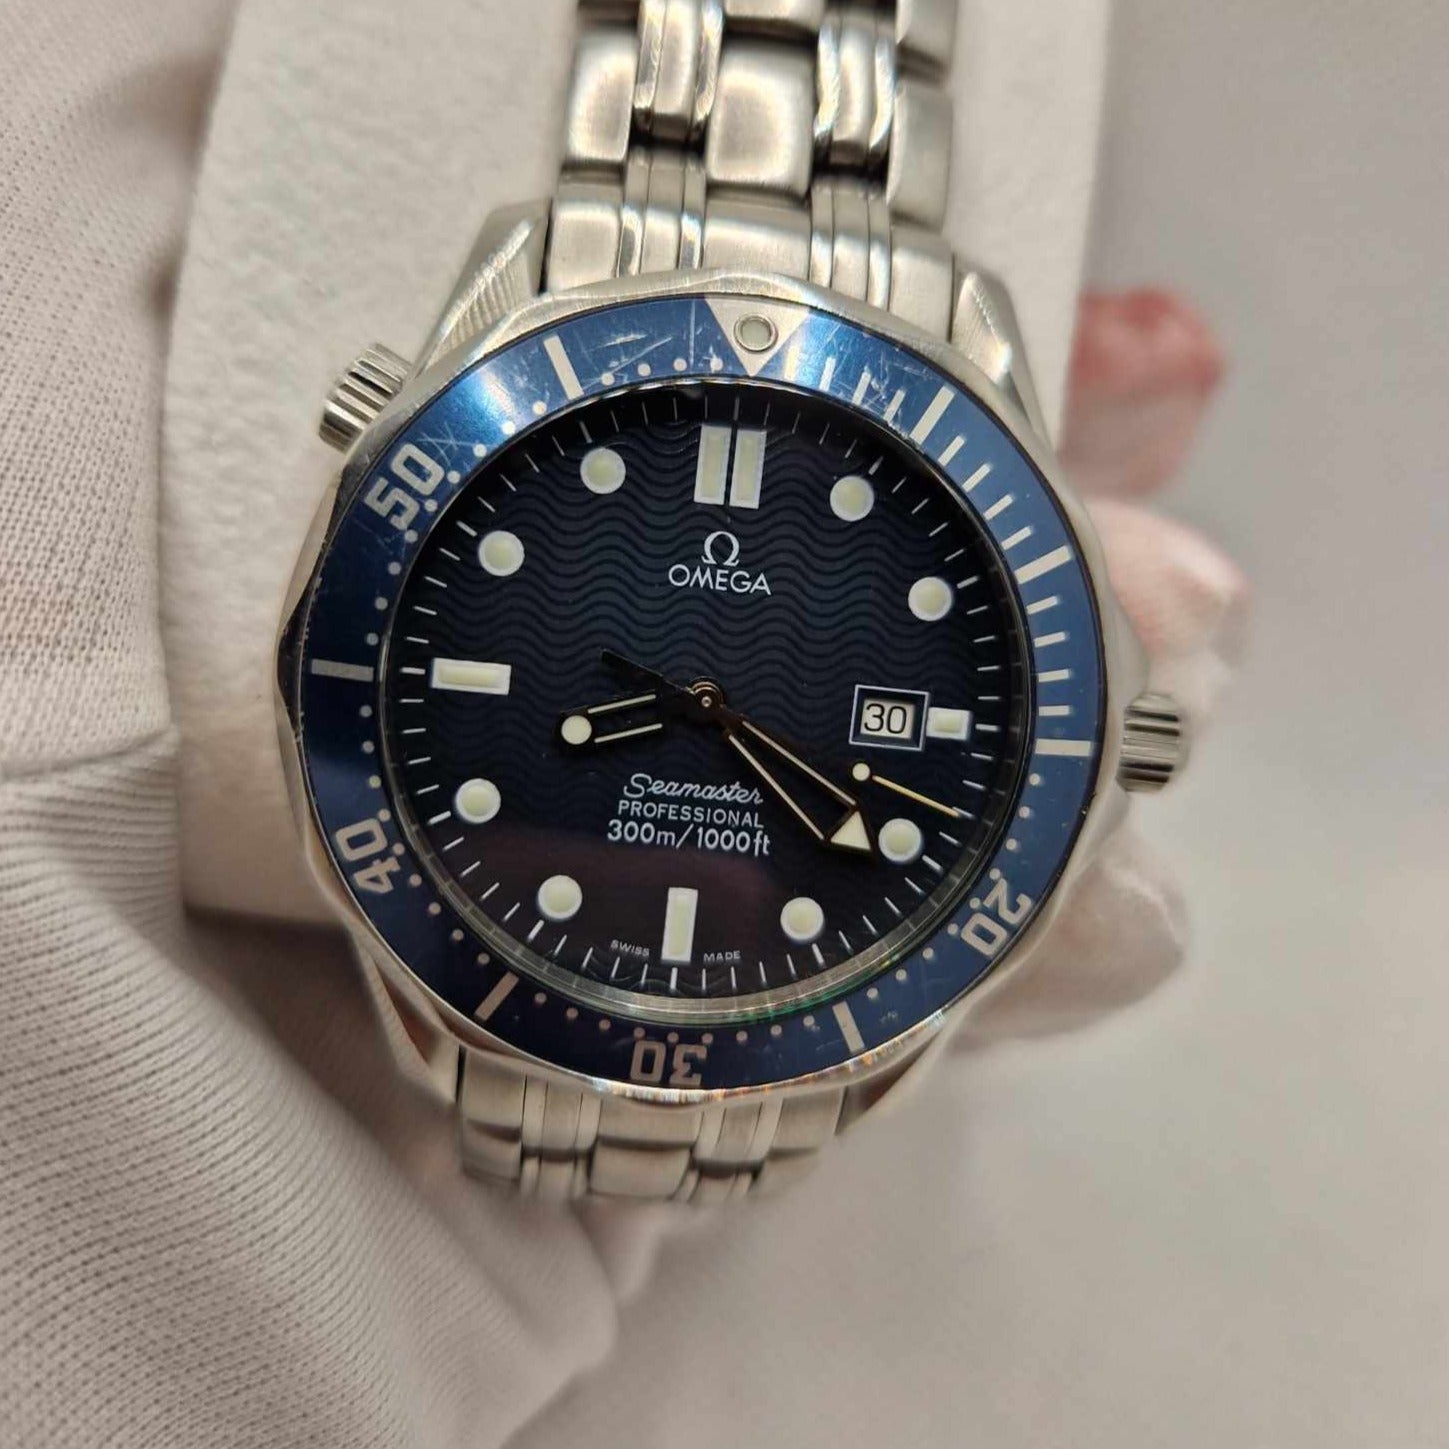 A image the Omega Seamaster "GoldenEye" Quartz 2541.80.00 showcasing the dial wave pattern blue diall and bezel